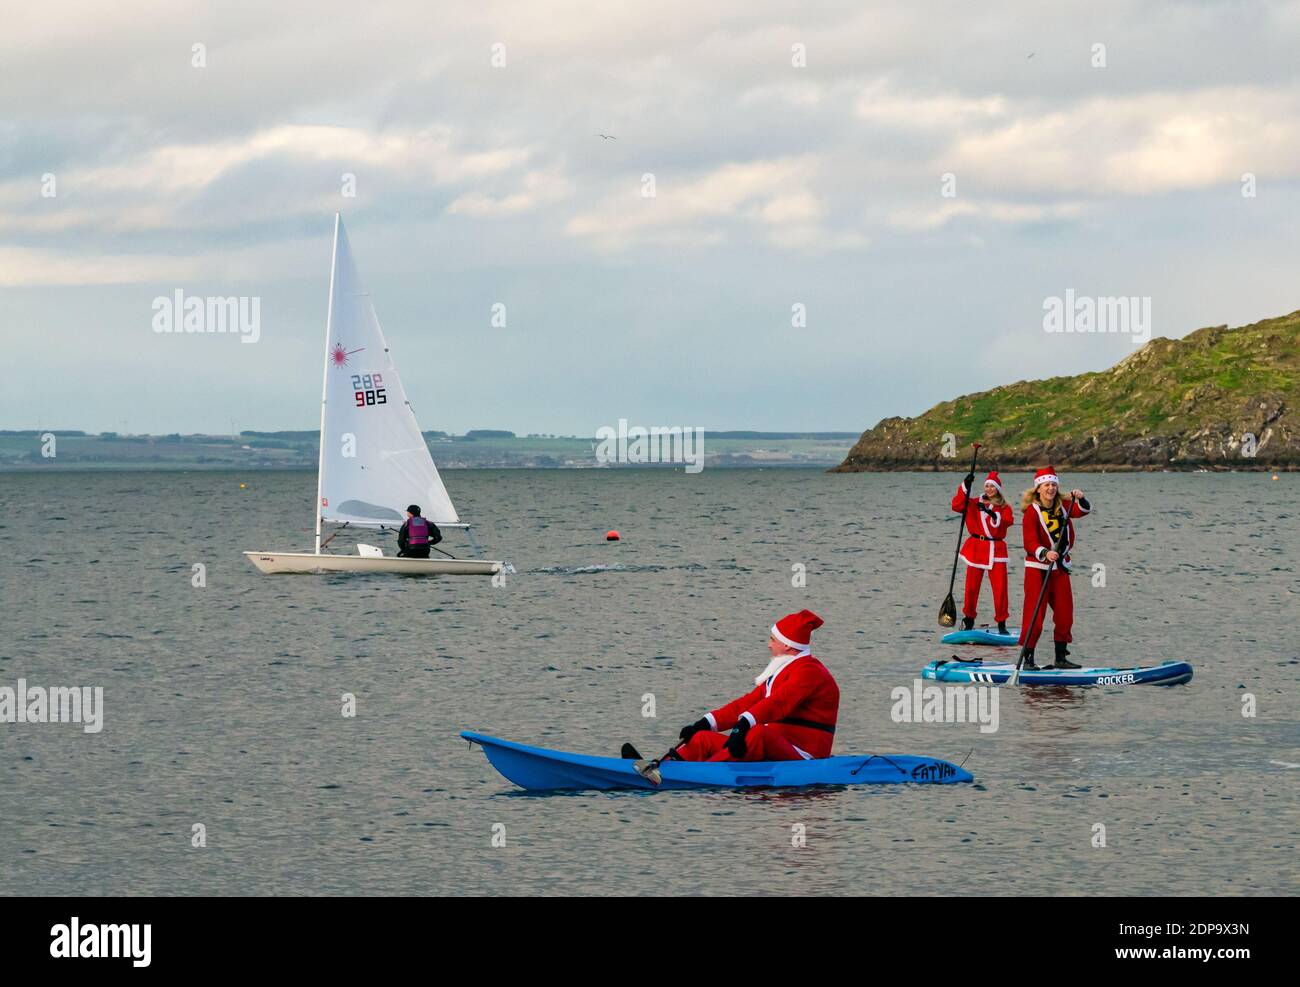 North Berwick, East Lothian, Scotland, United Kingdom, 19th December 2020. Paddle Boarding Santas for charity: a local community initiative by North Berwick News and Views called 'Christmas Cheer' raises over £5,000 funds for families in need. The paddle boarders are dressed in Santa costumes with a sailing boat passing by Stock Photo